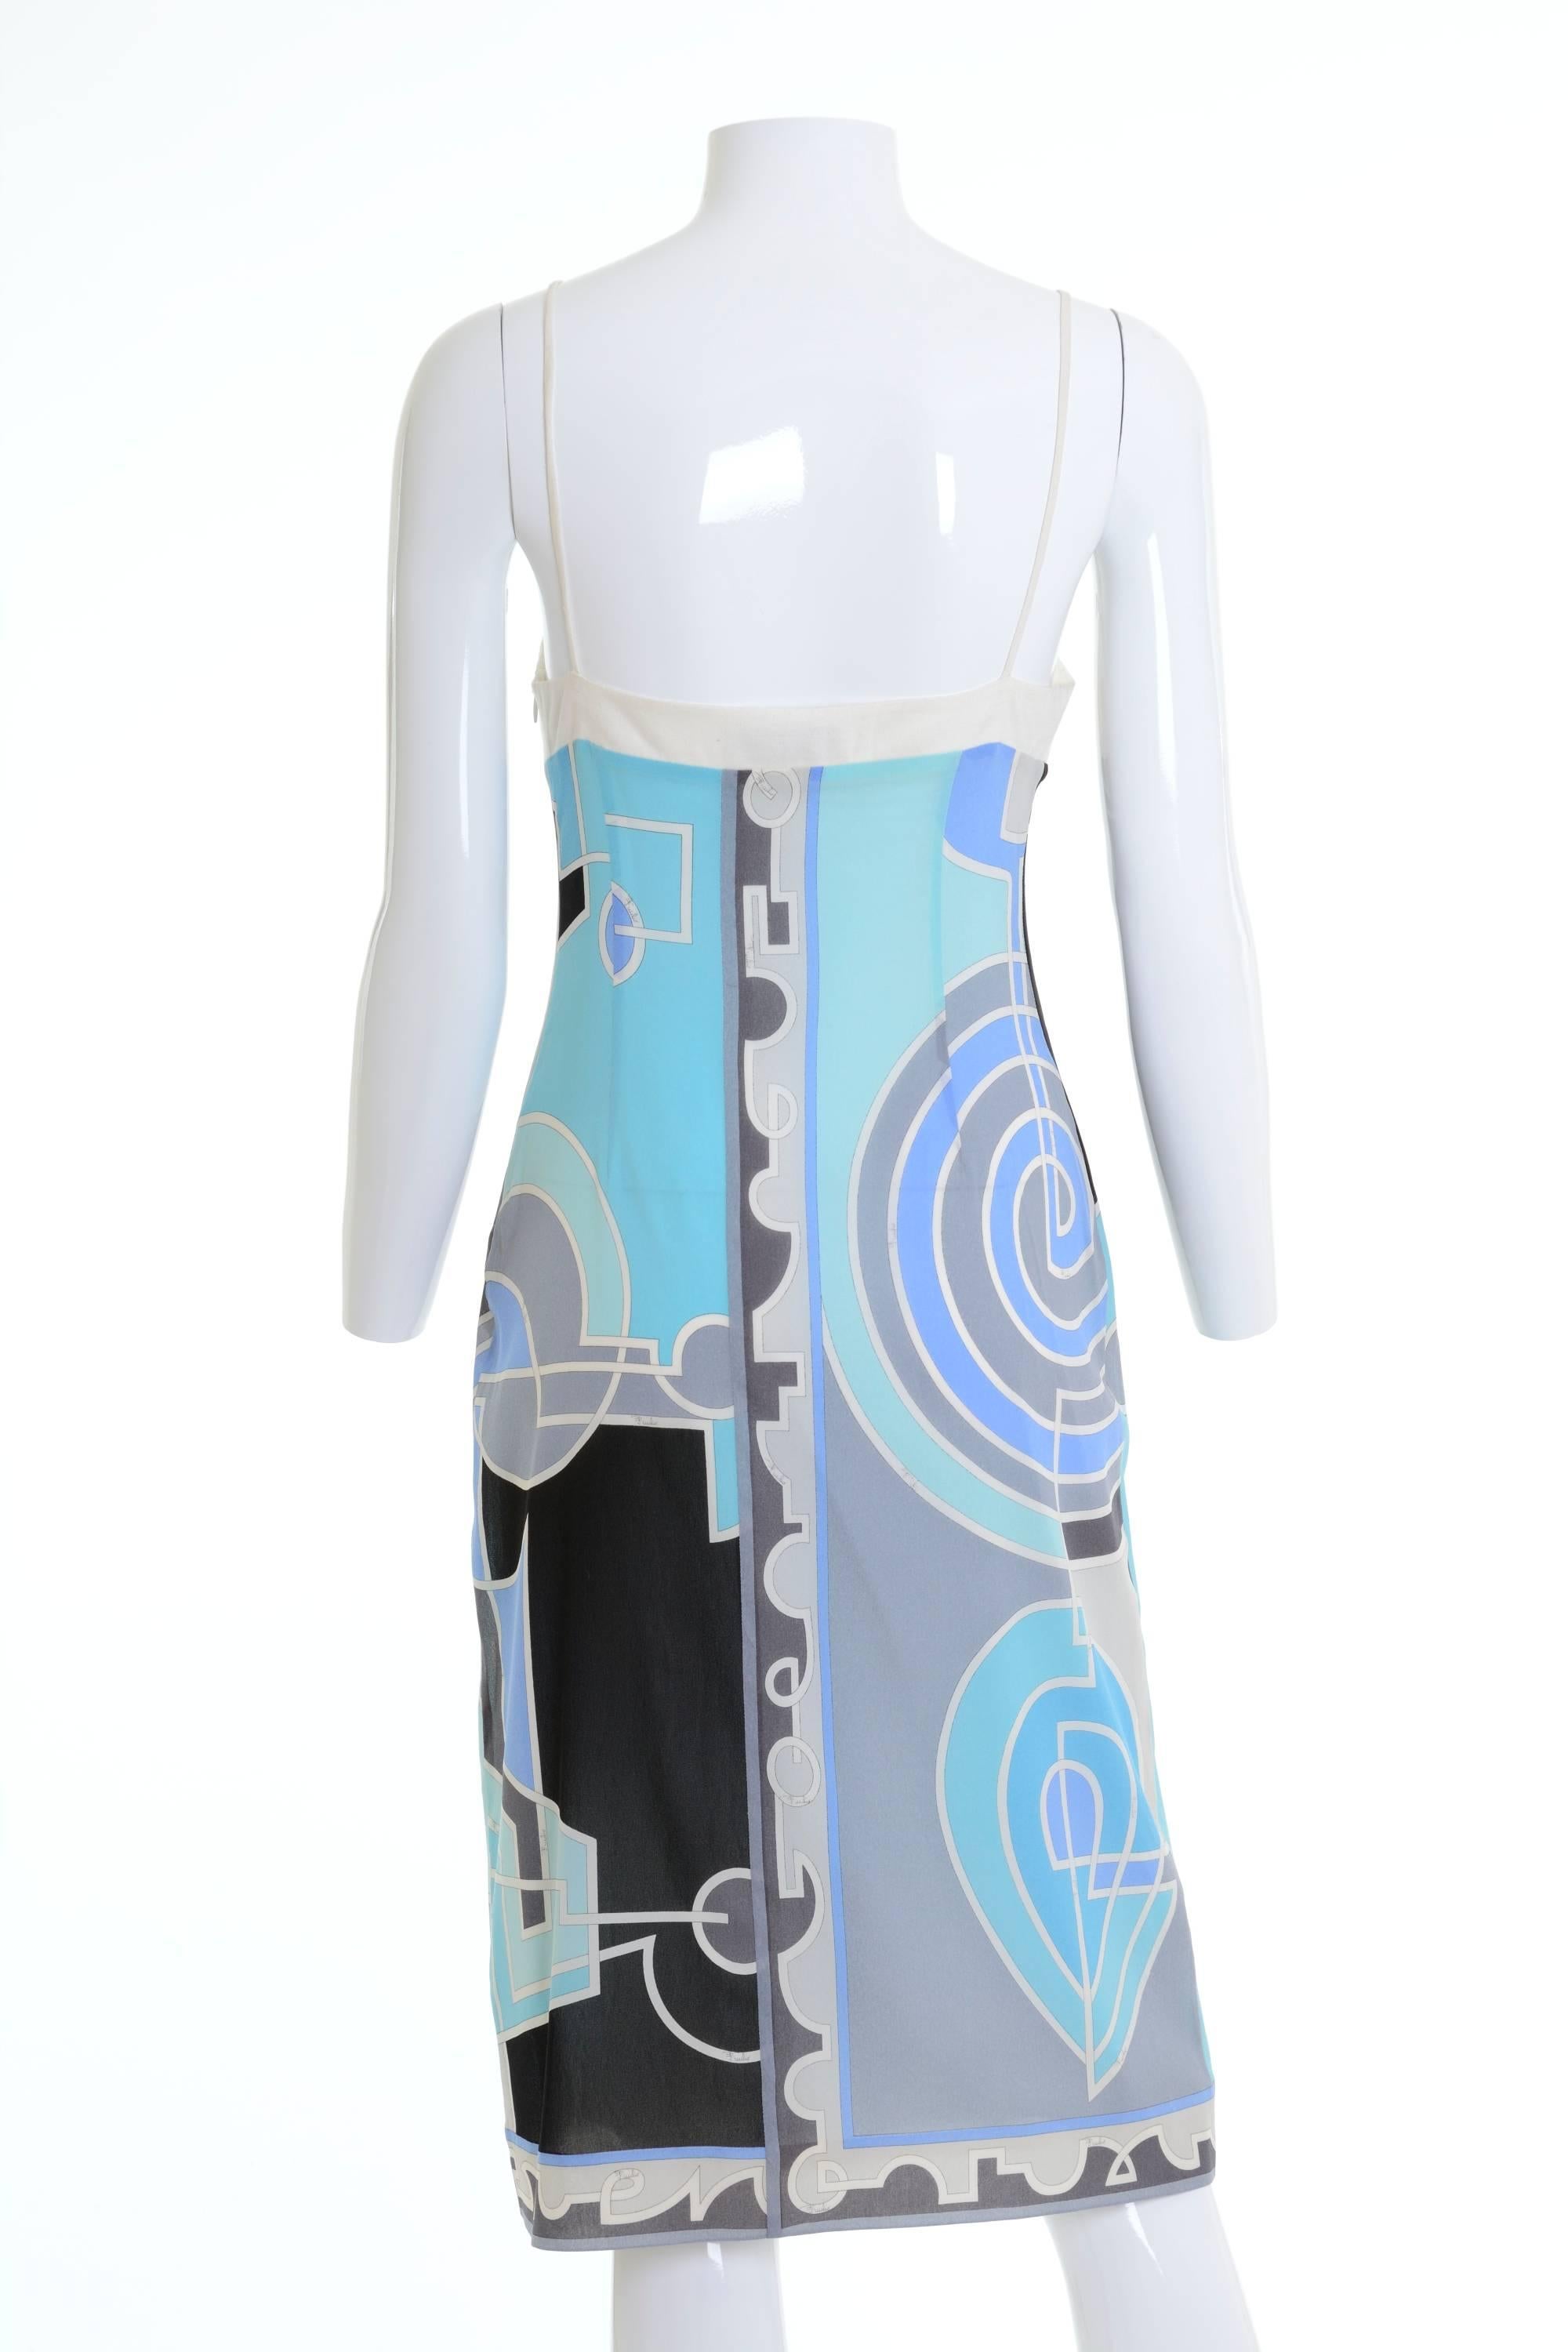 This lovely Emilio Pucci dress is made of silk stretch fabric with geometric abstract Pucci style print. It has spaghetti straps and is fully lined.

Good condition

Label: Emilio Pucci - Firenze
Fabric: silk/cotton/spandex
Color: